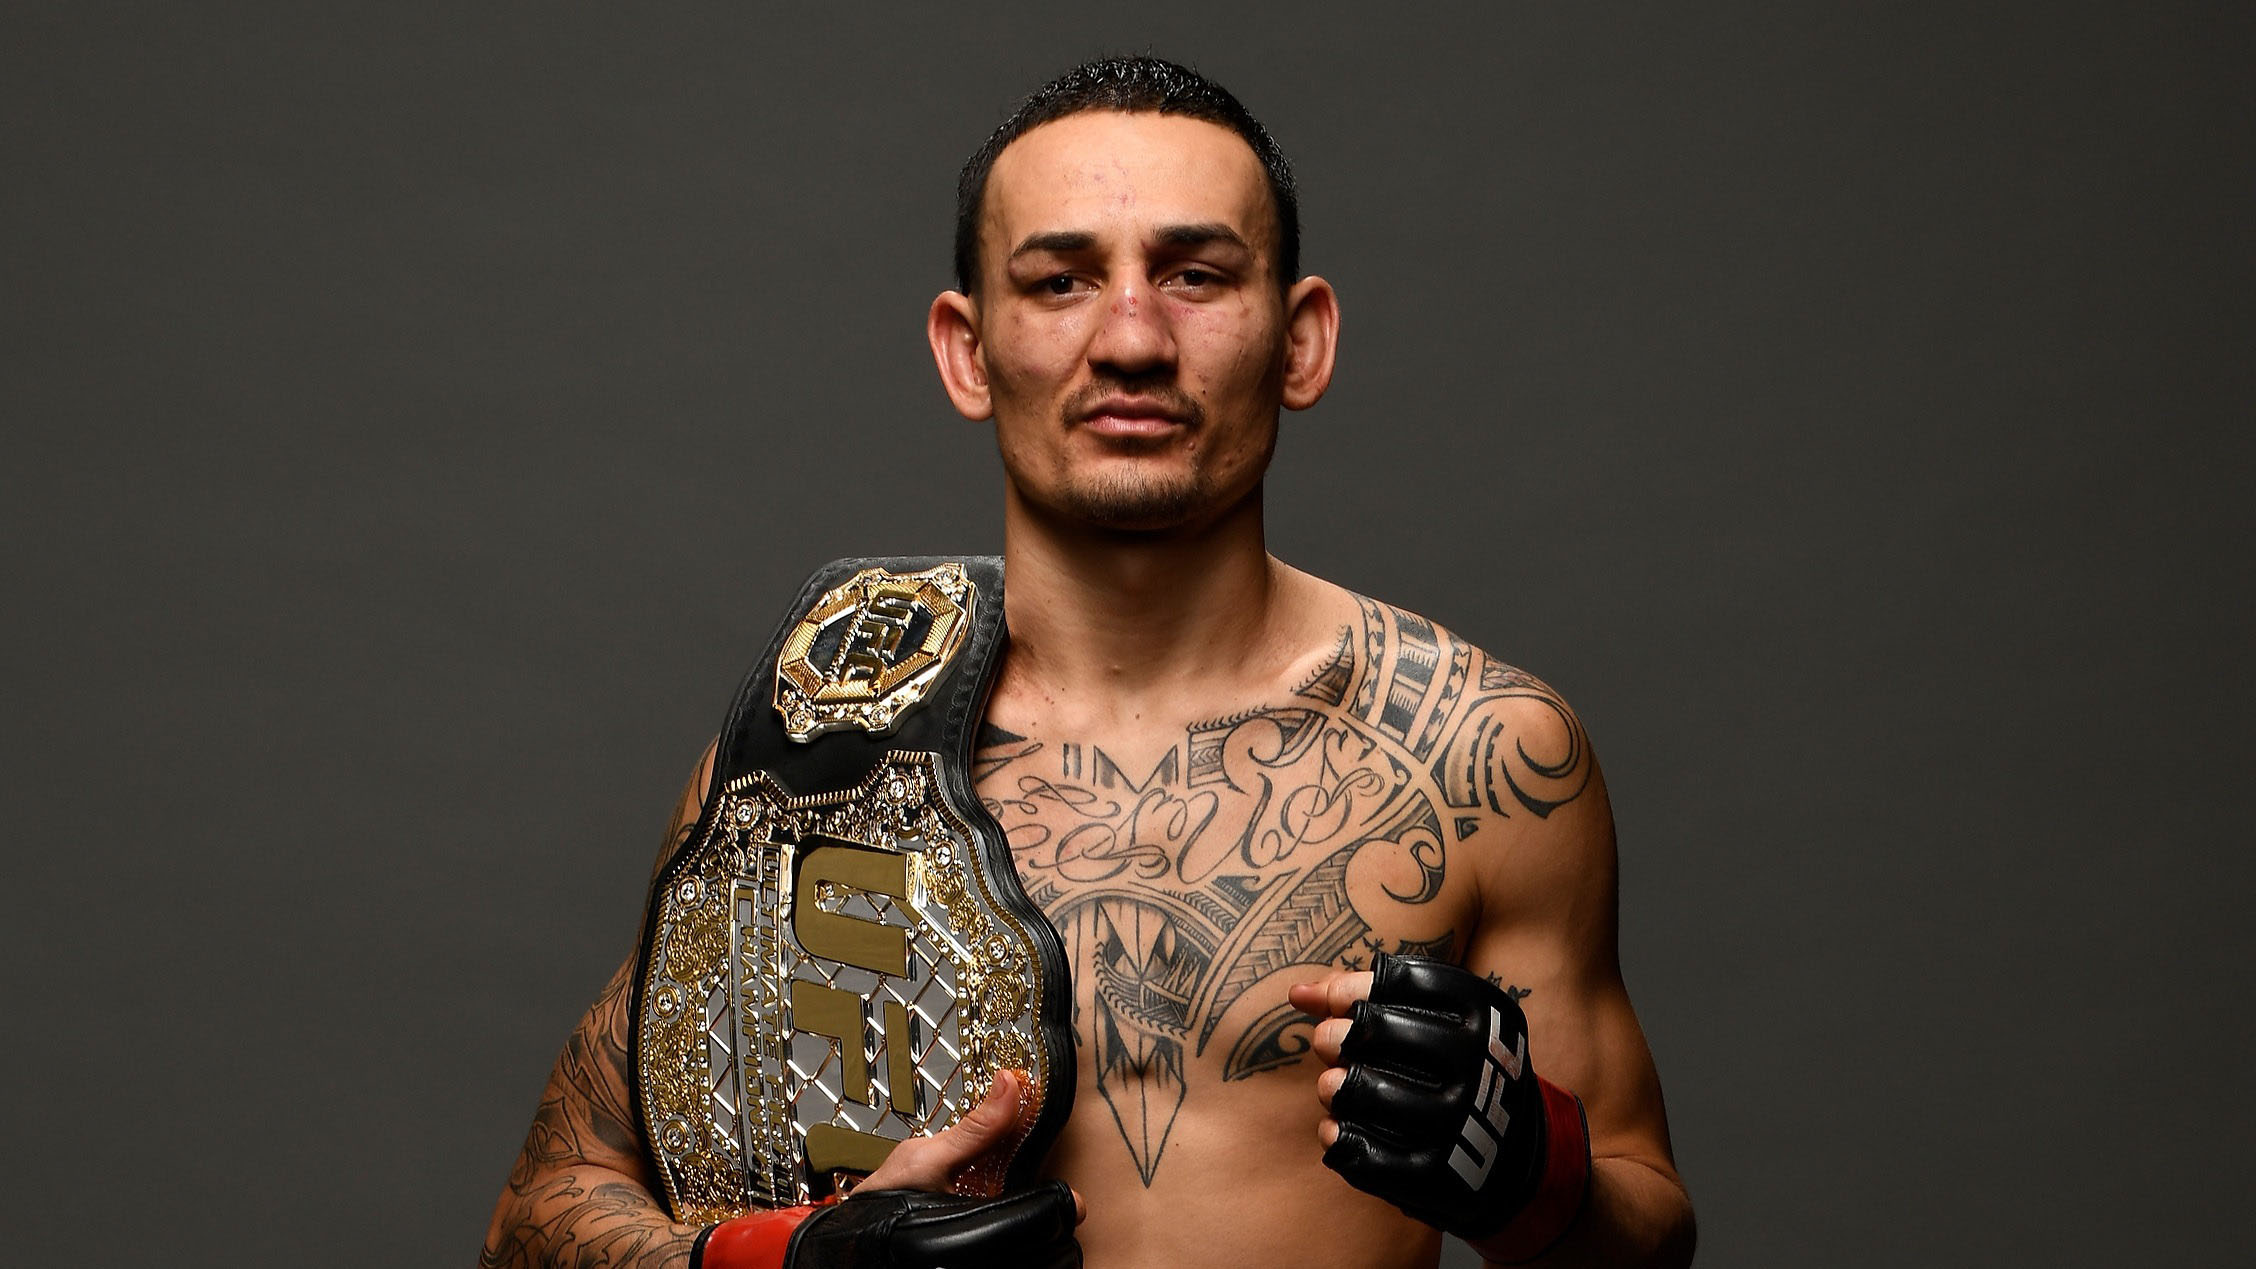 Jerome Max Keli'i Holloway (born December 4, 1991) is an American professional mixed martial artist who competes in the featherweight division of the ...